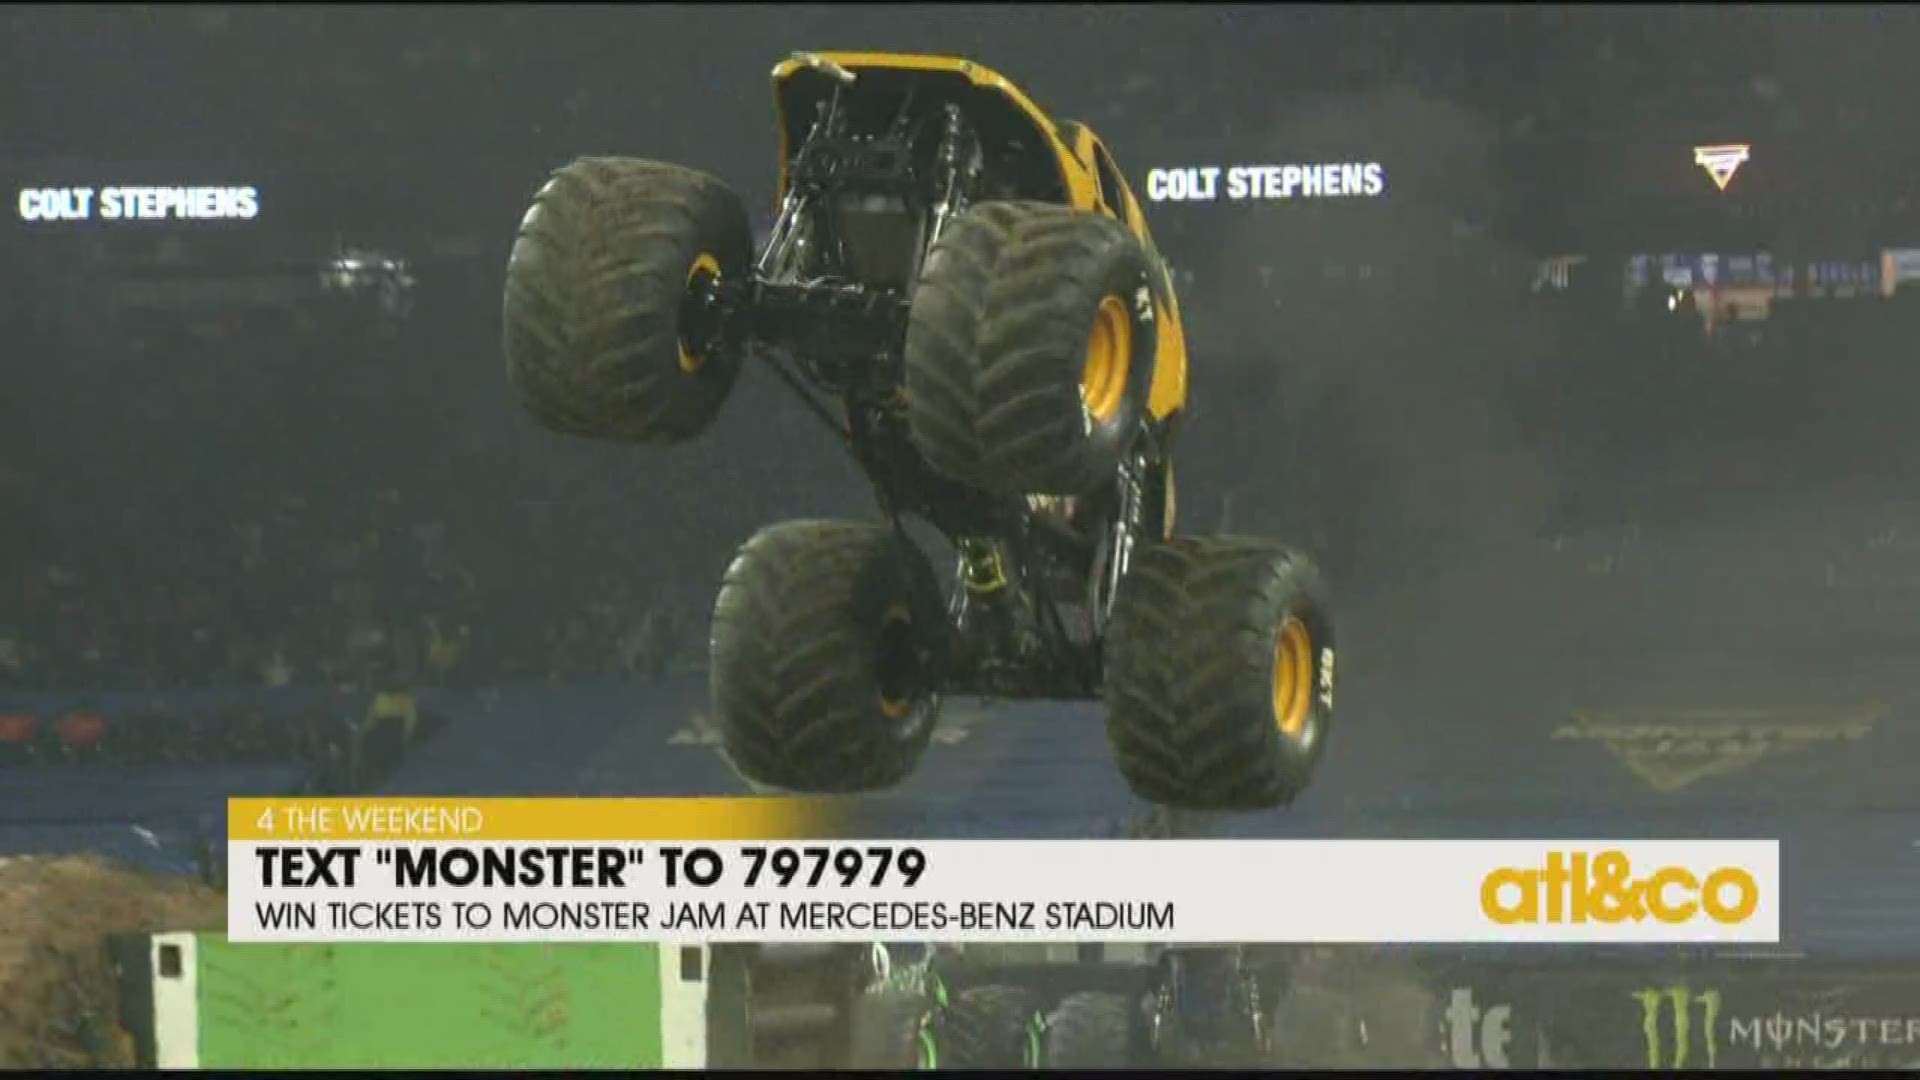 Text the word "MONSTER" to 797979 for a chance at Monster Jam tickets on February 22-23. Must be 18 to enter.